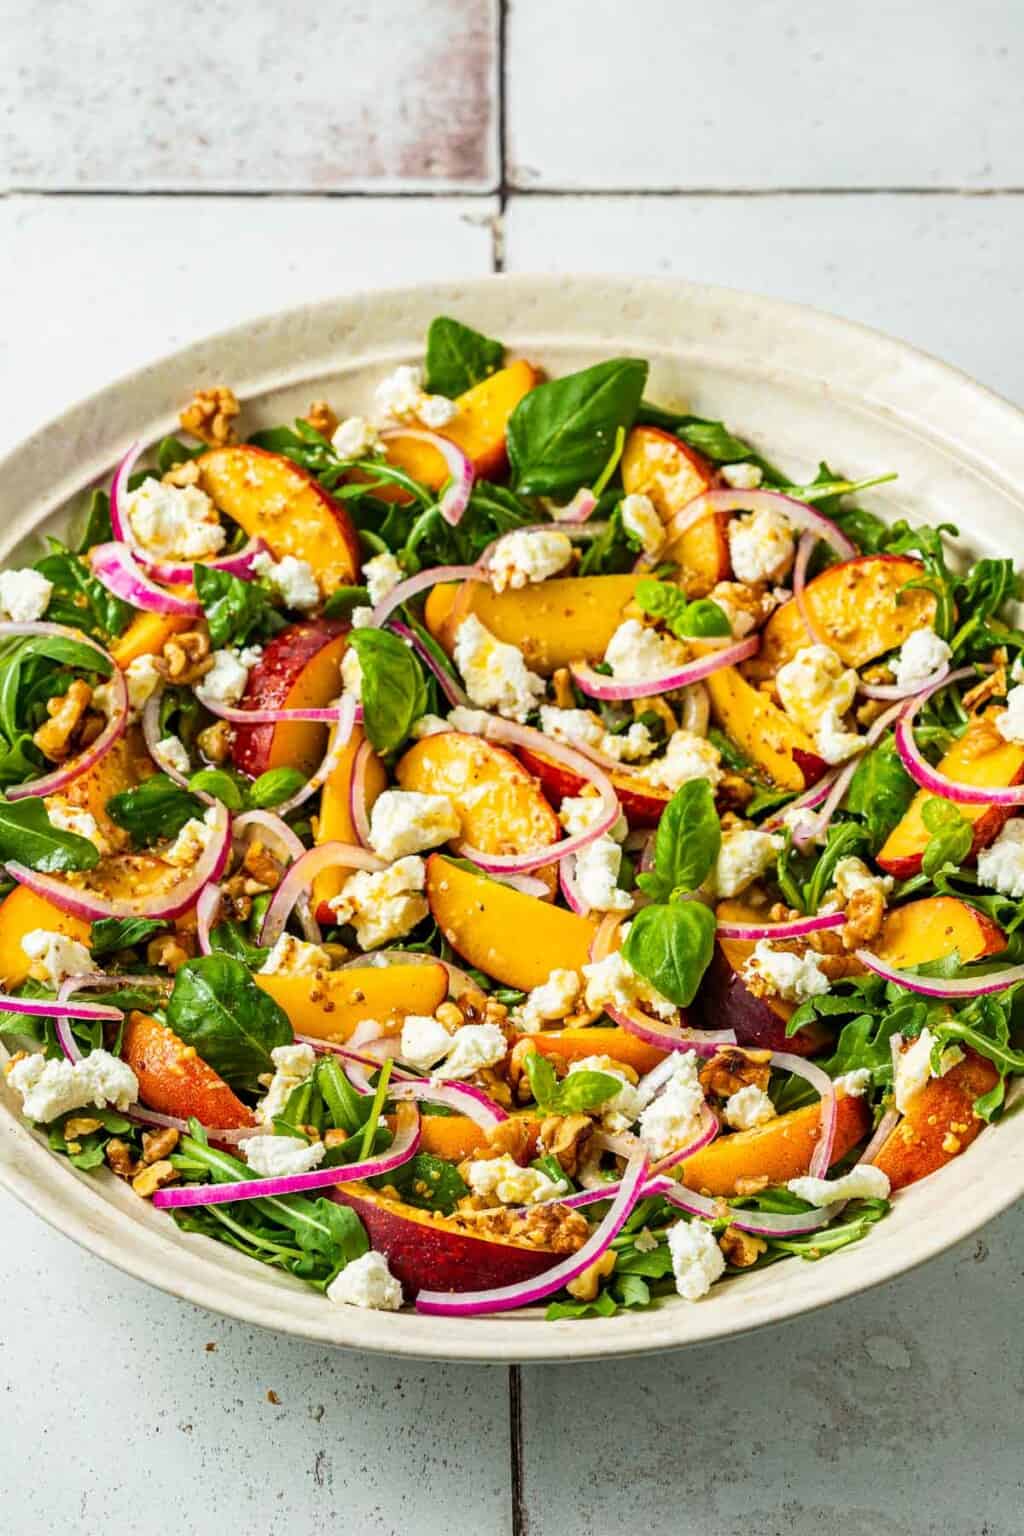 Peach Salad with Basil and Goat Cheese | The Mediterranean Dish